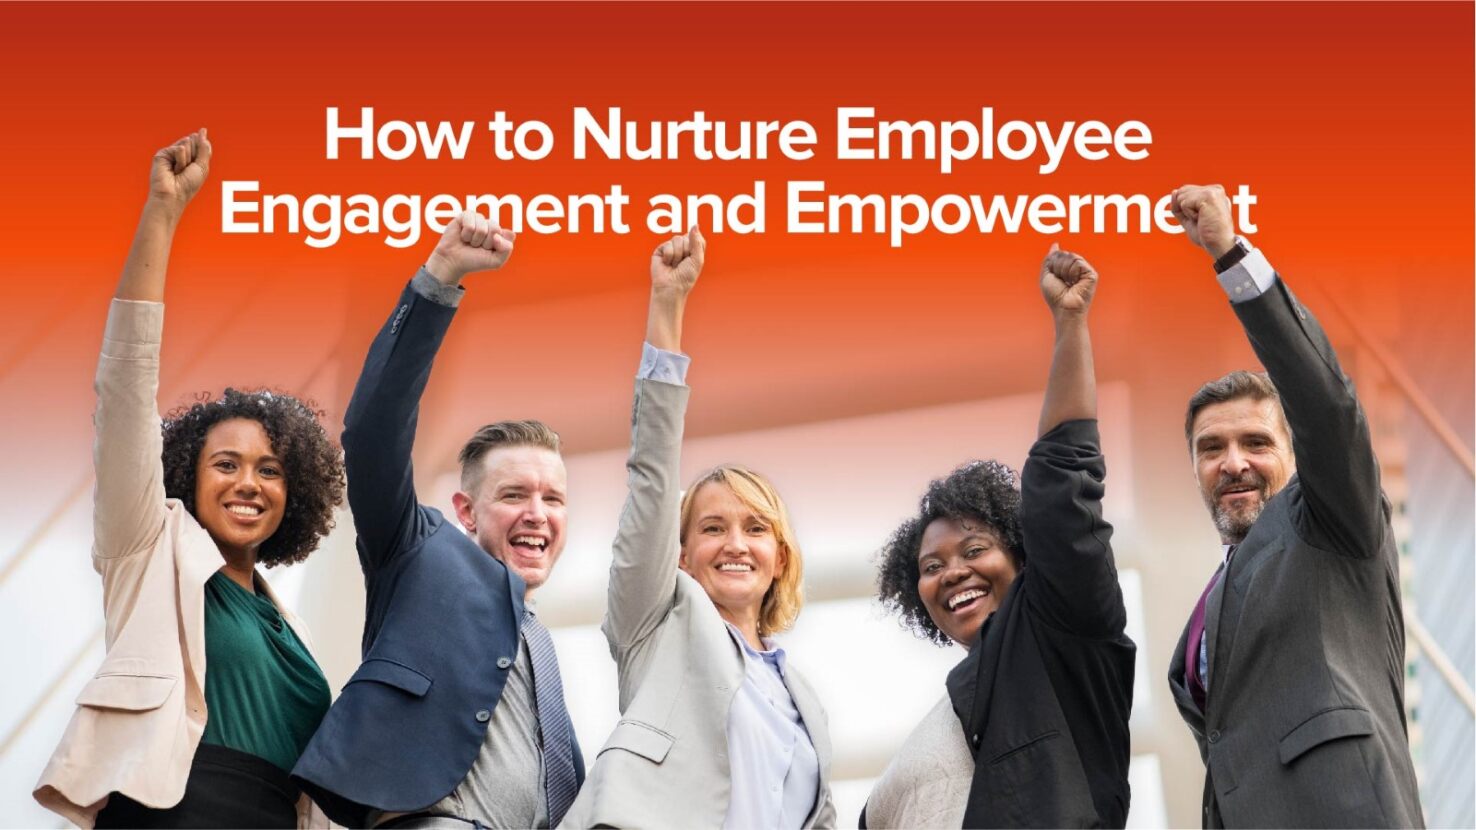 How to Nurture Employee Engagement and Empowerment